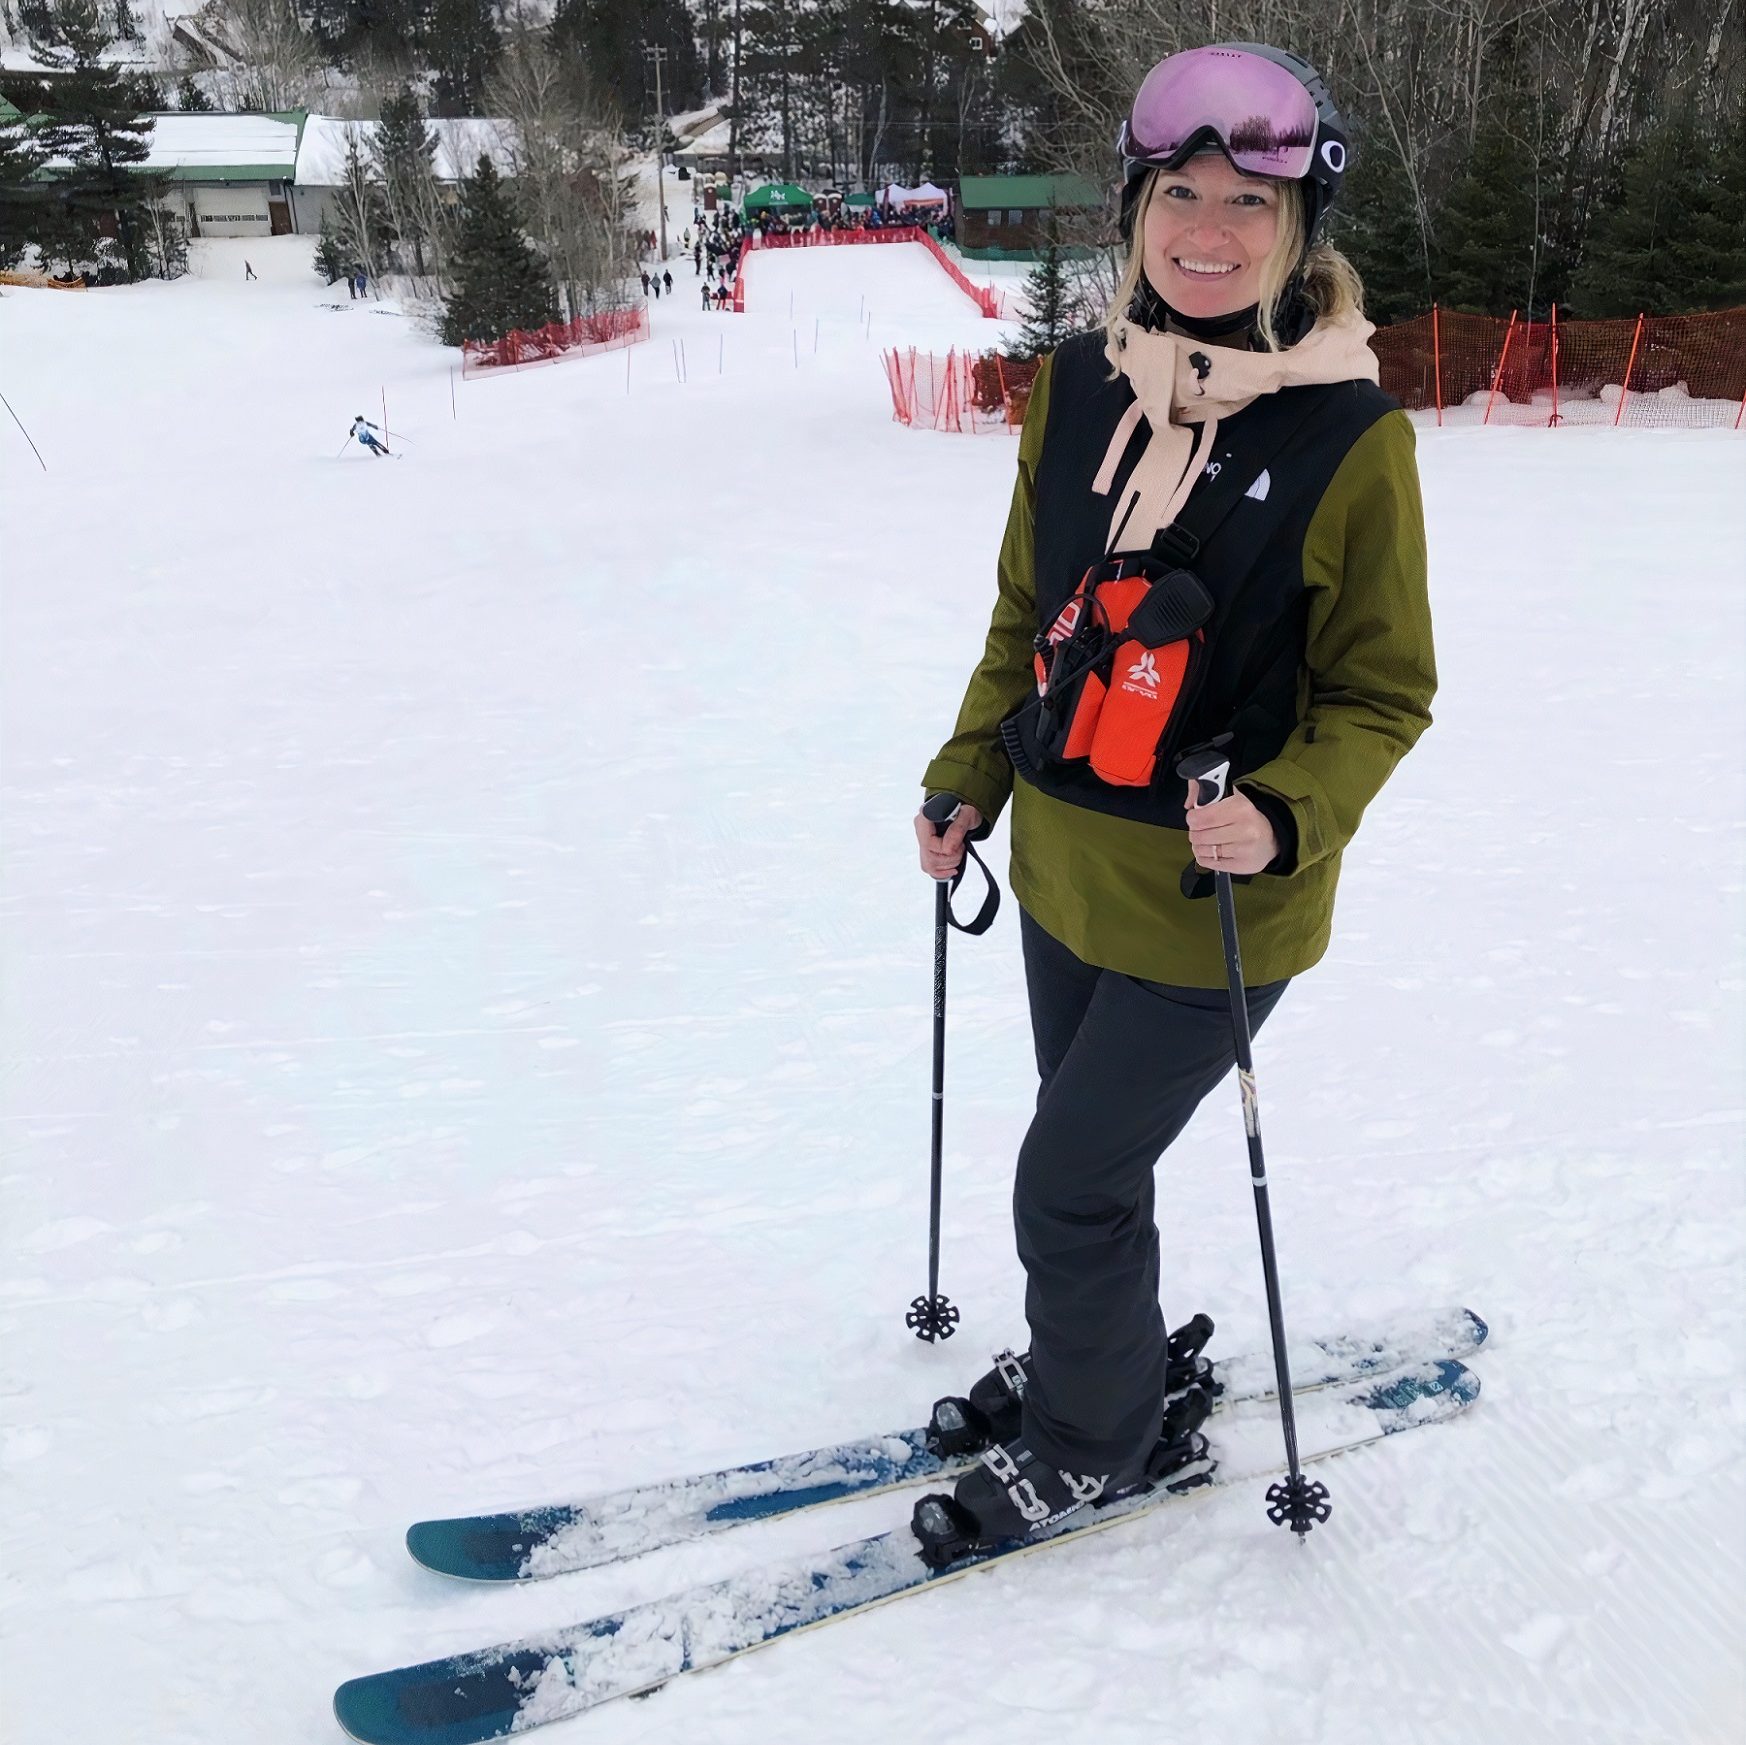 Dr. Capitano standing in snow in her skis